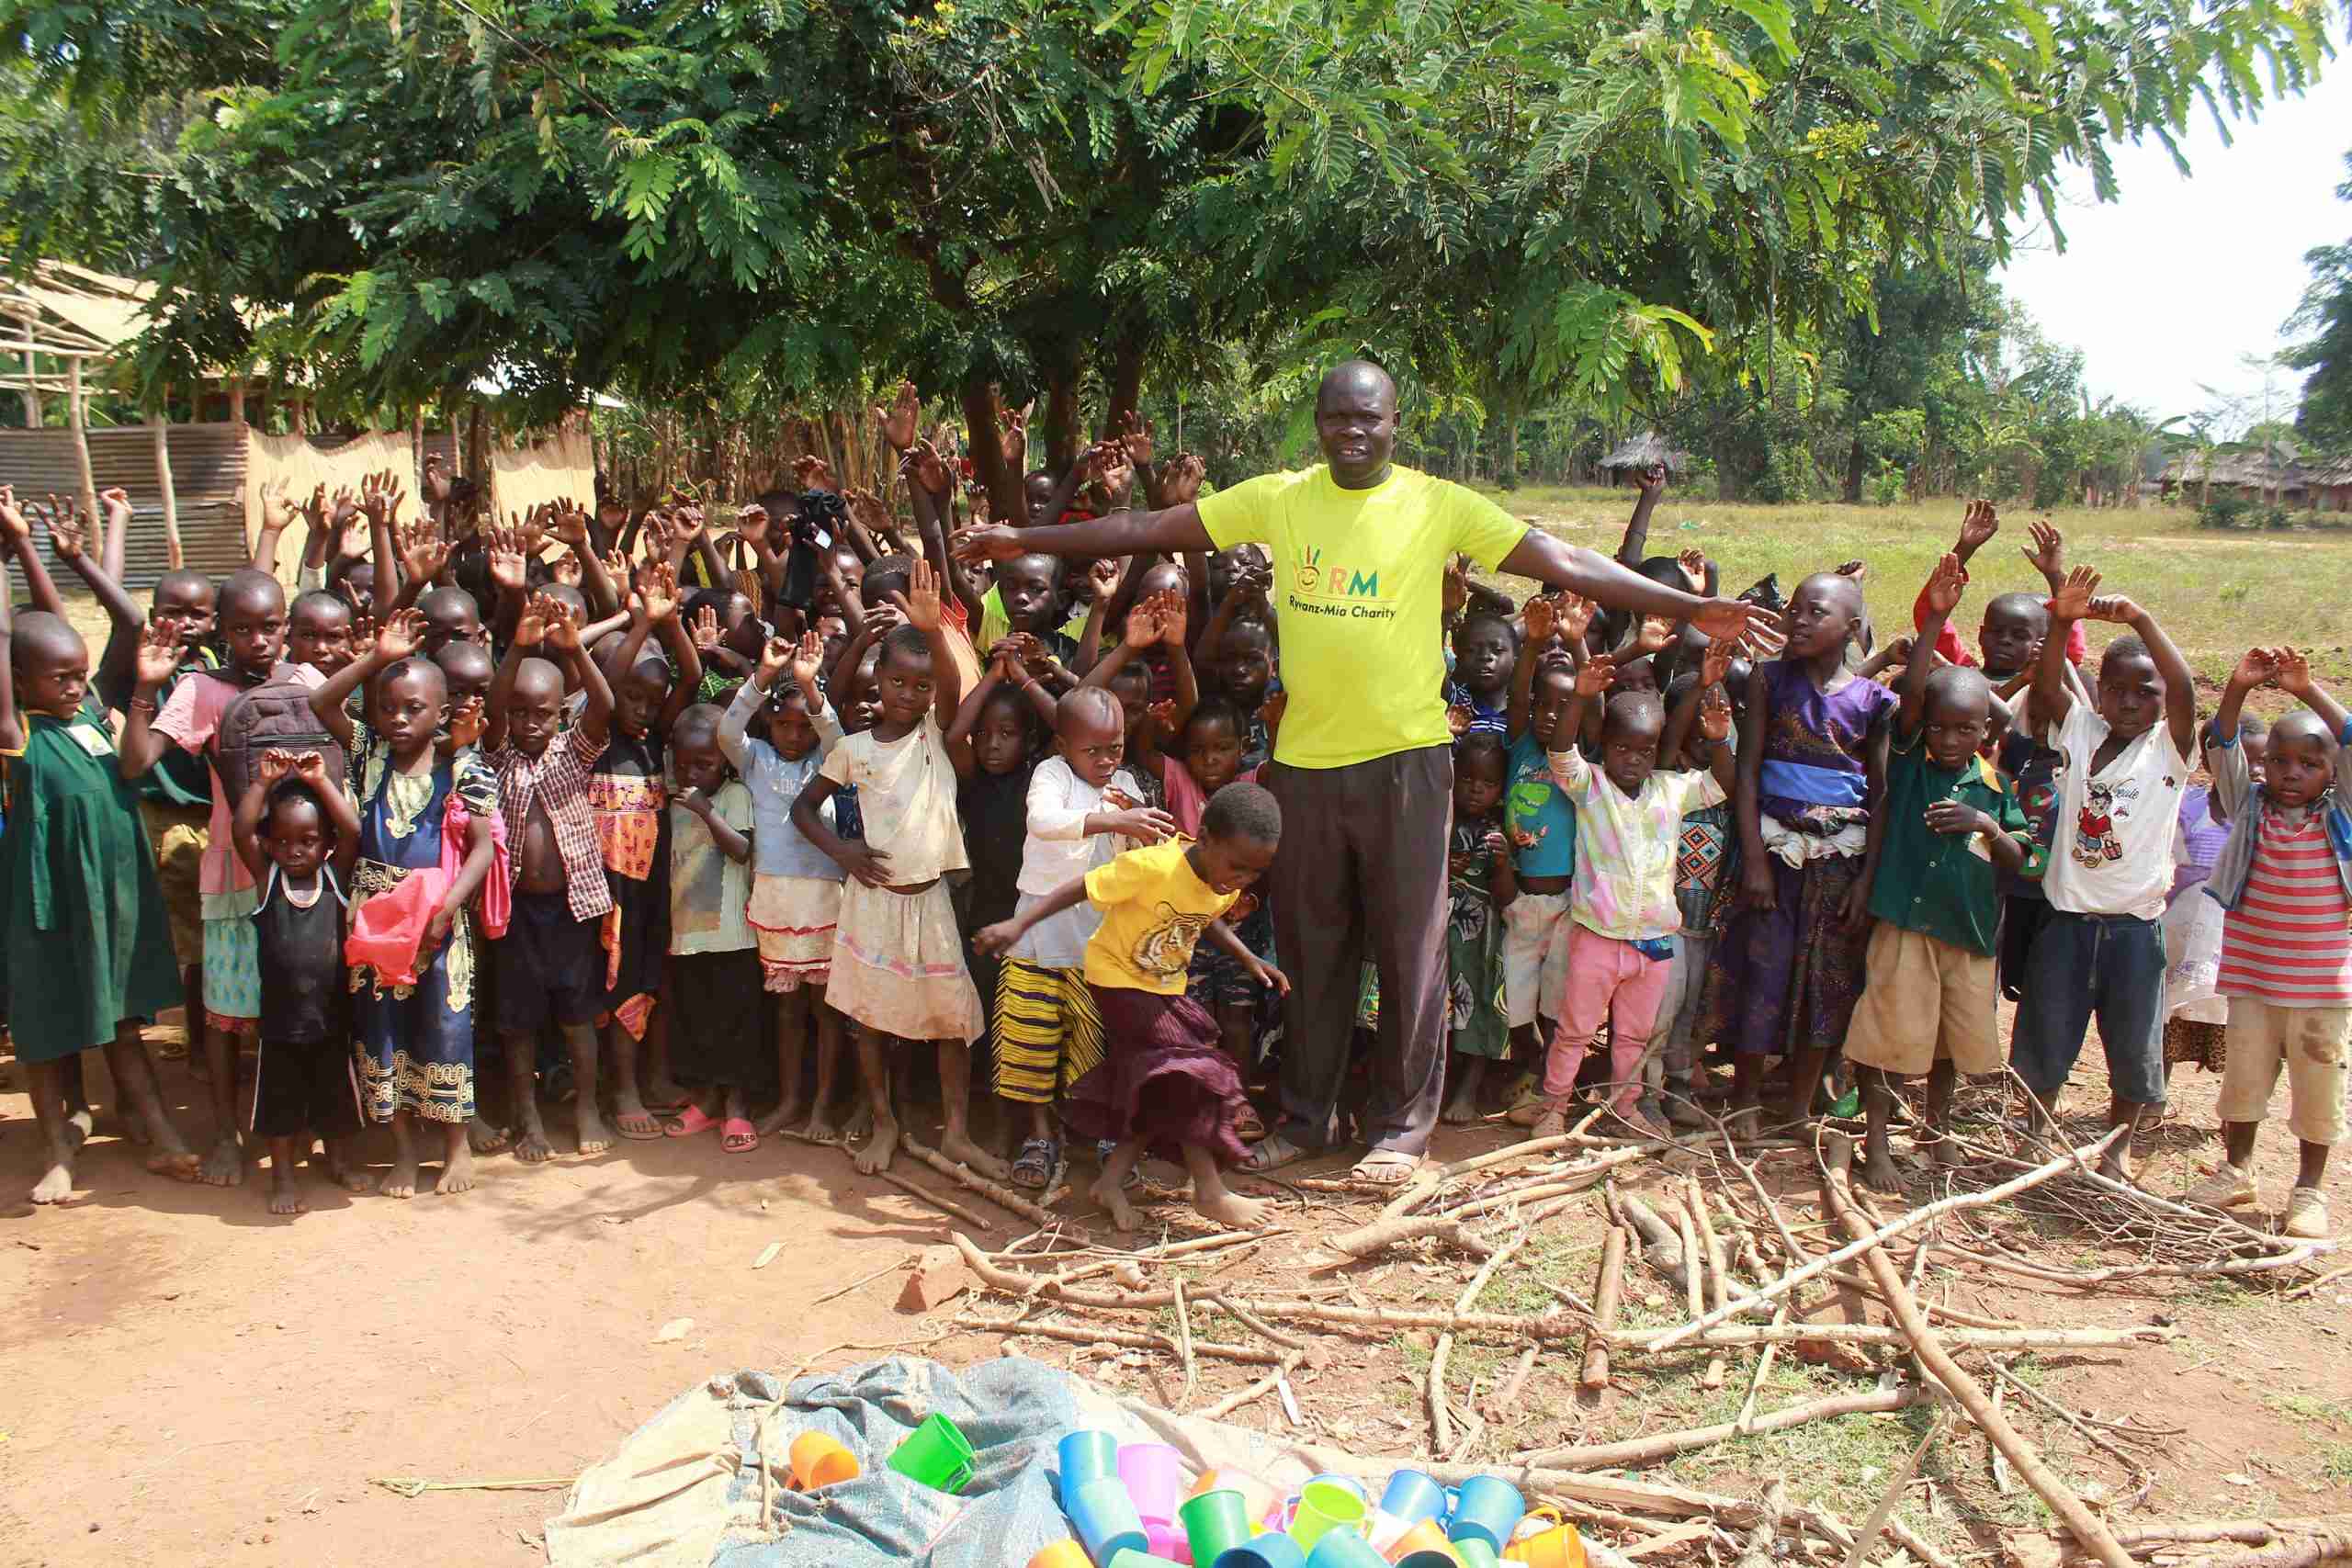 SCCF and the children in Kaliro